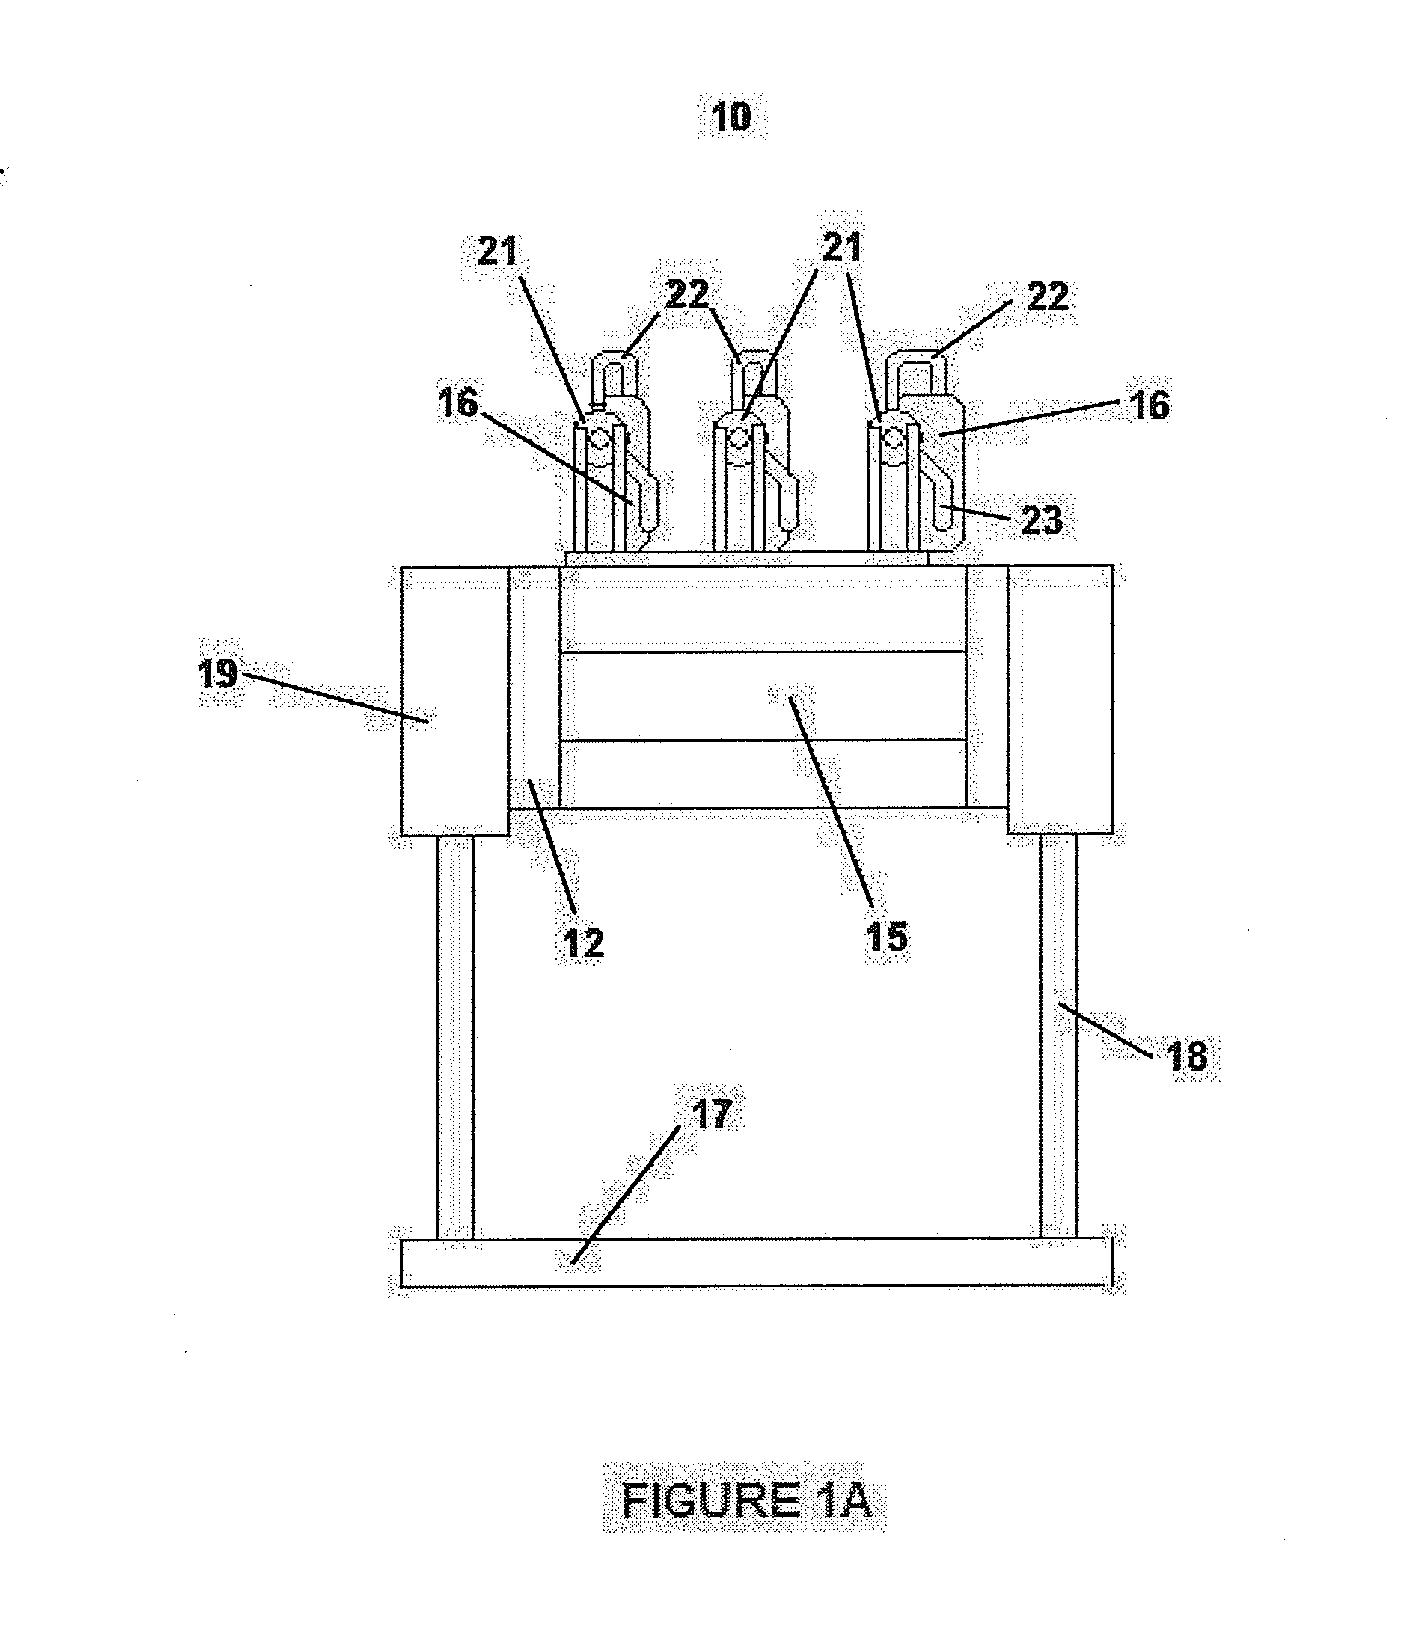 System and method for renewable electrical power production using wave energy